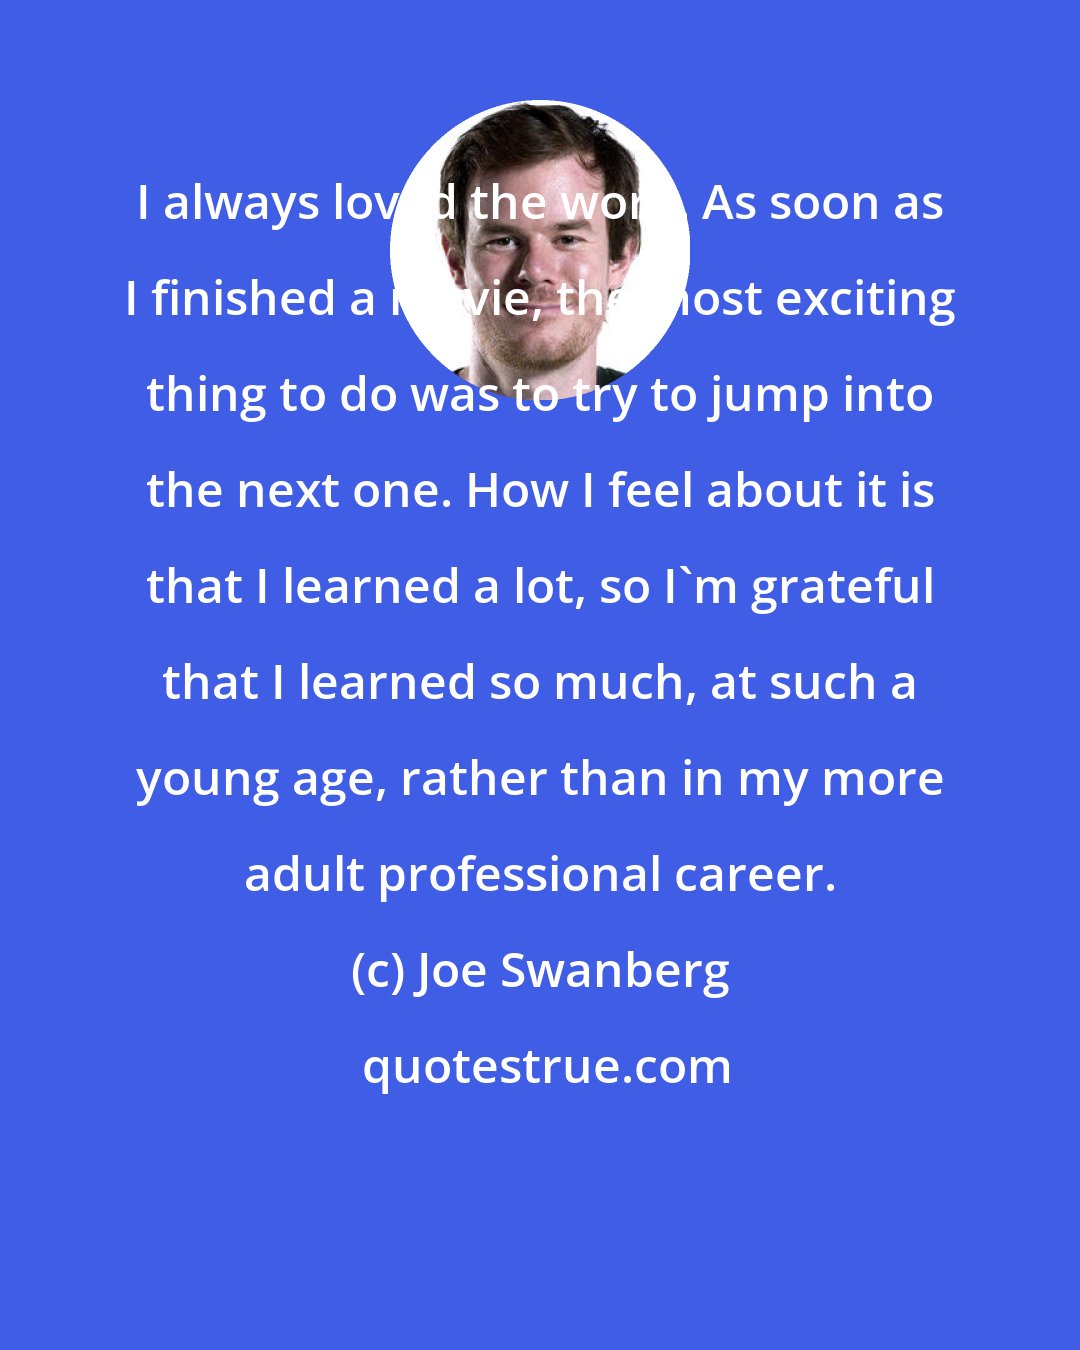 Joe Swanberg: I always loved the work. As soon as I finished a movie, the most exciting thing to do was to try to jump into the next one. How I feel about it is that I learned a lot, so I'm grateful that I learned so much, at such a young age, rather than in my more adult professional career.